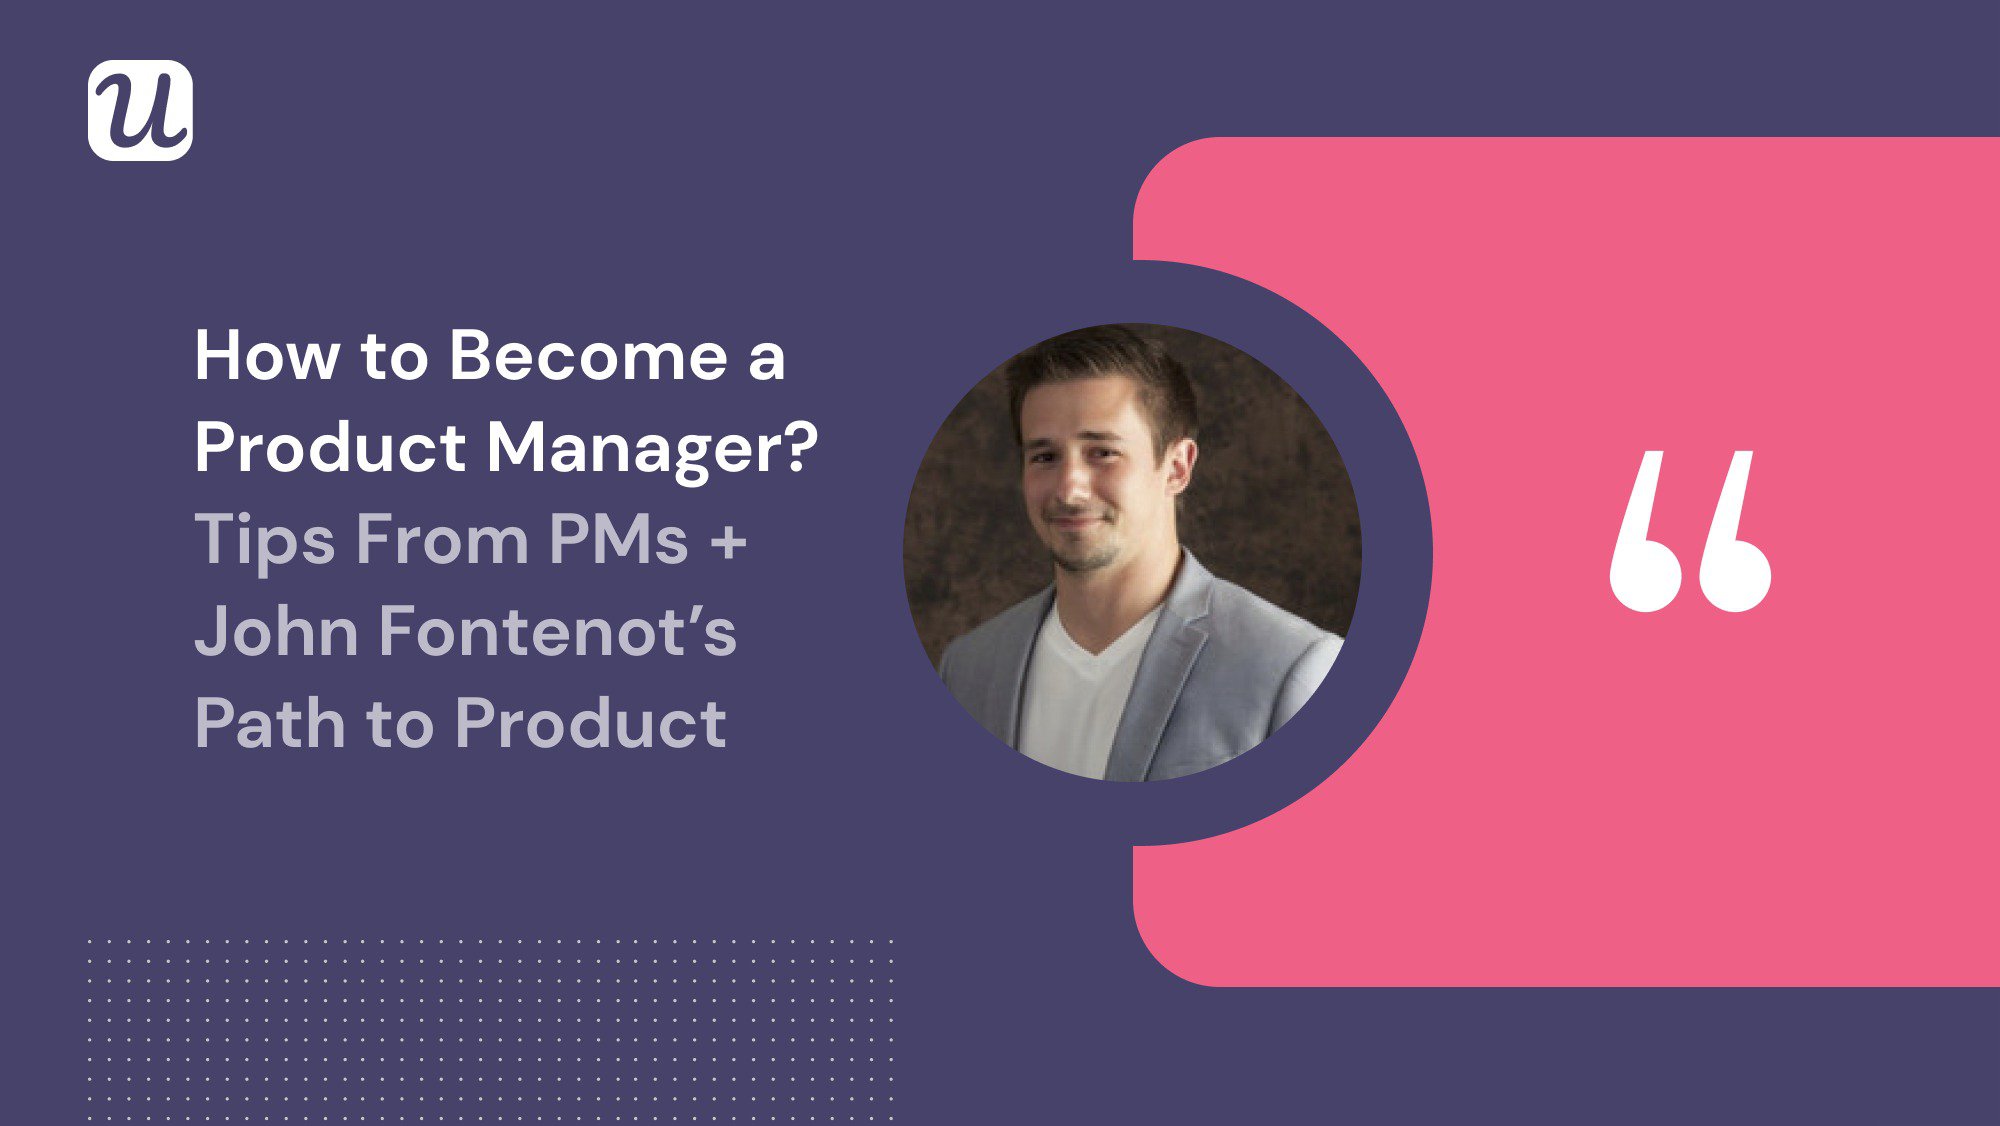 How to Become a Product Manager? 3 Tips From PMs + John Fontenot’s Path to Product